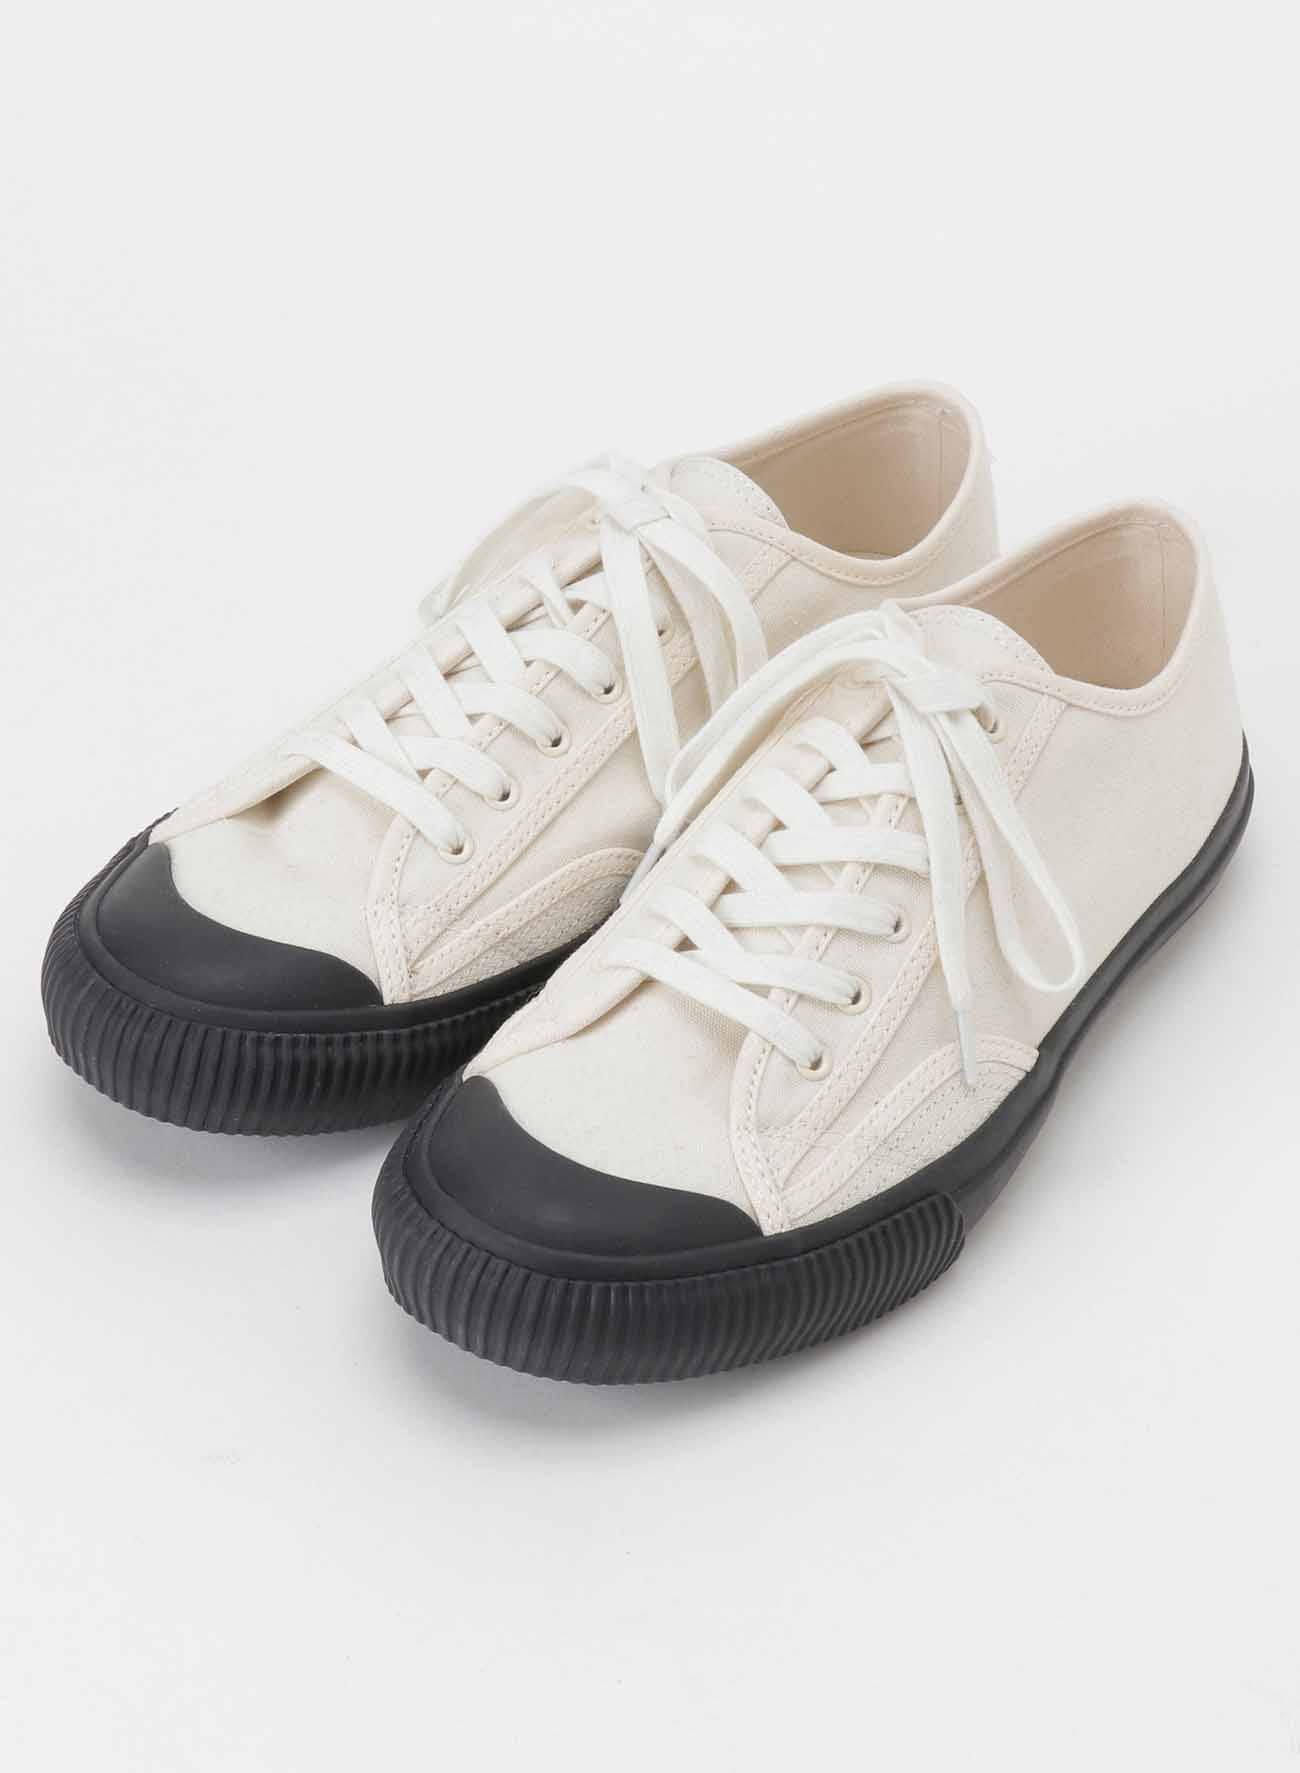 NO.9 CANVAS FLAT SNEAKERS(22.5 OFF WHITE): Vintage 1.1｜THE SHOP